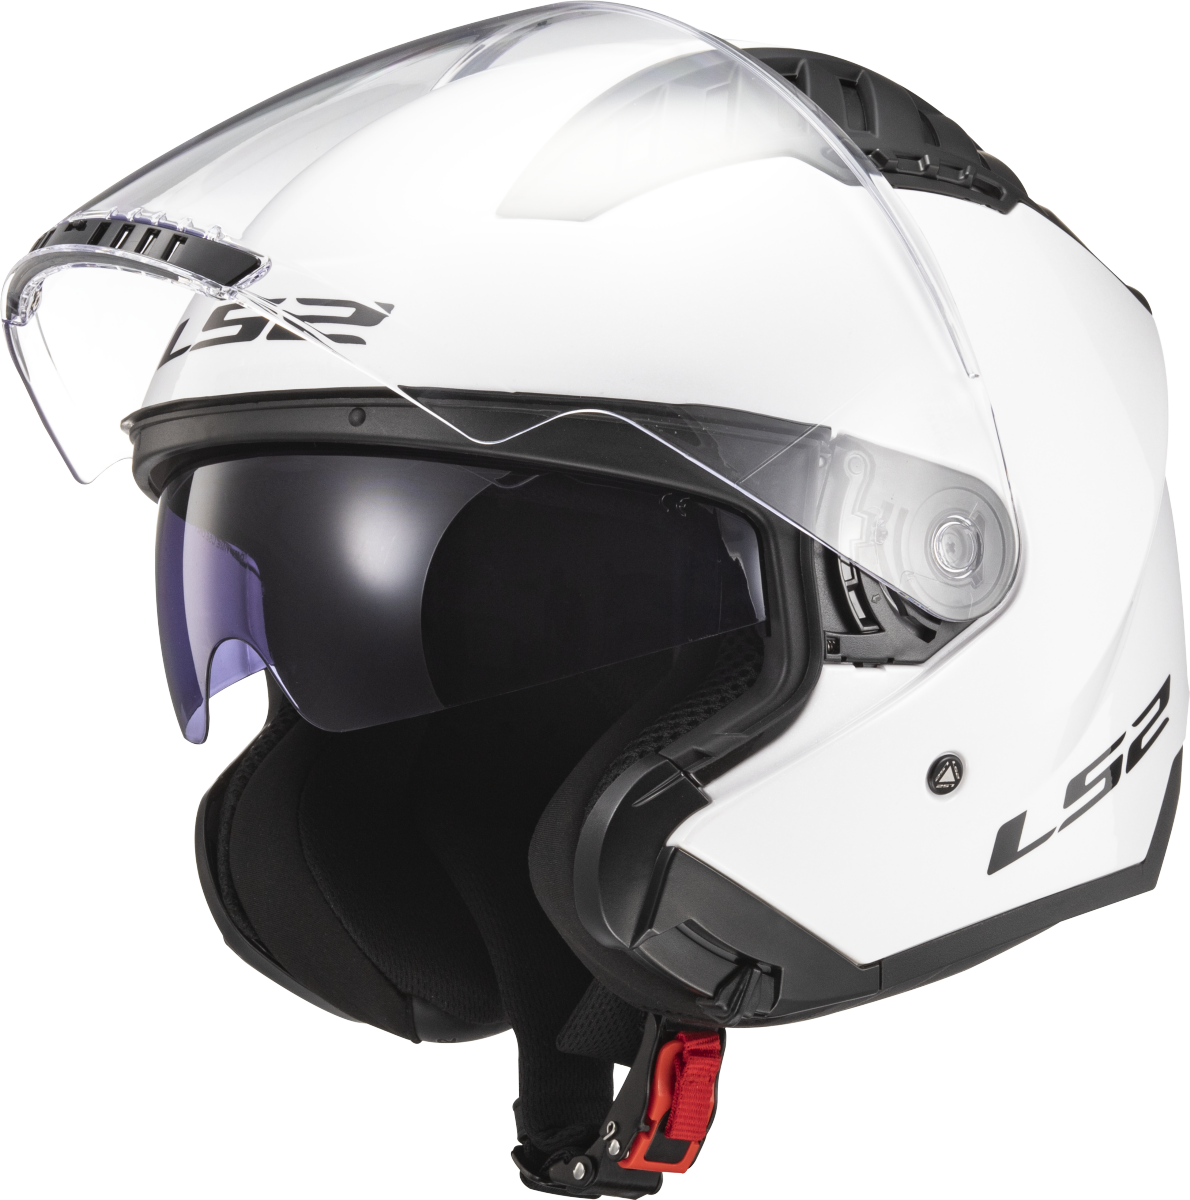 Casco LS2 OF600 COPTER SOLID BLANCO 7